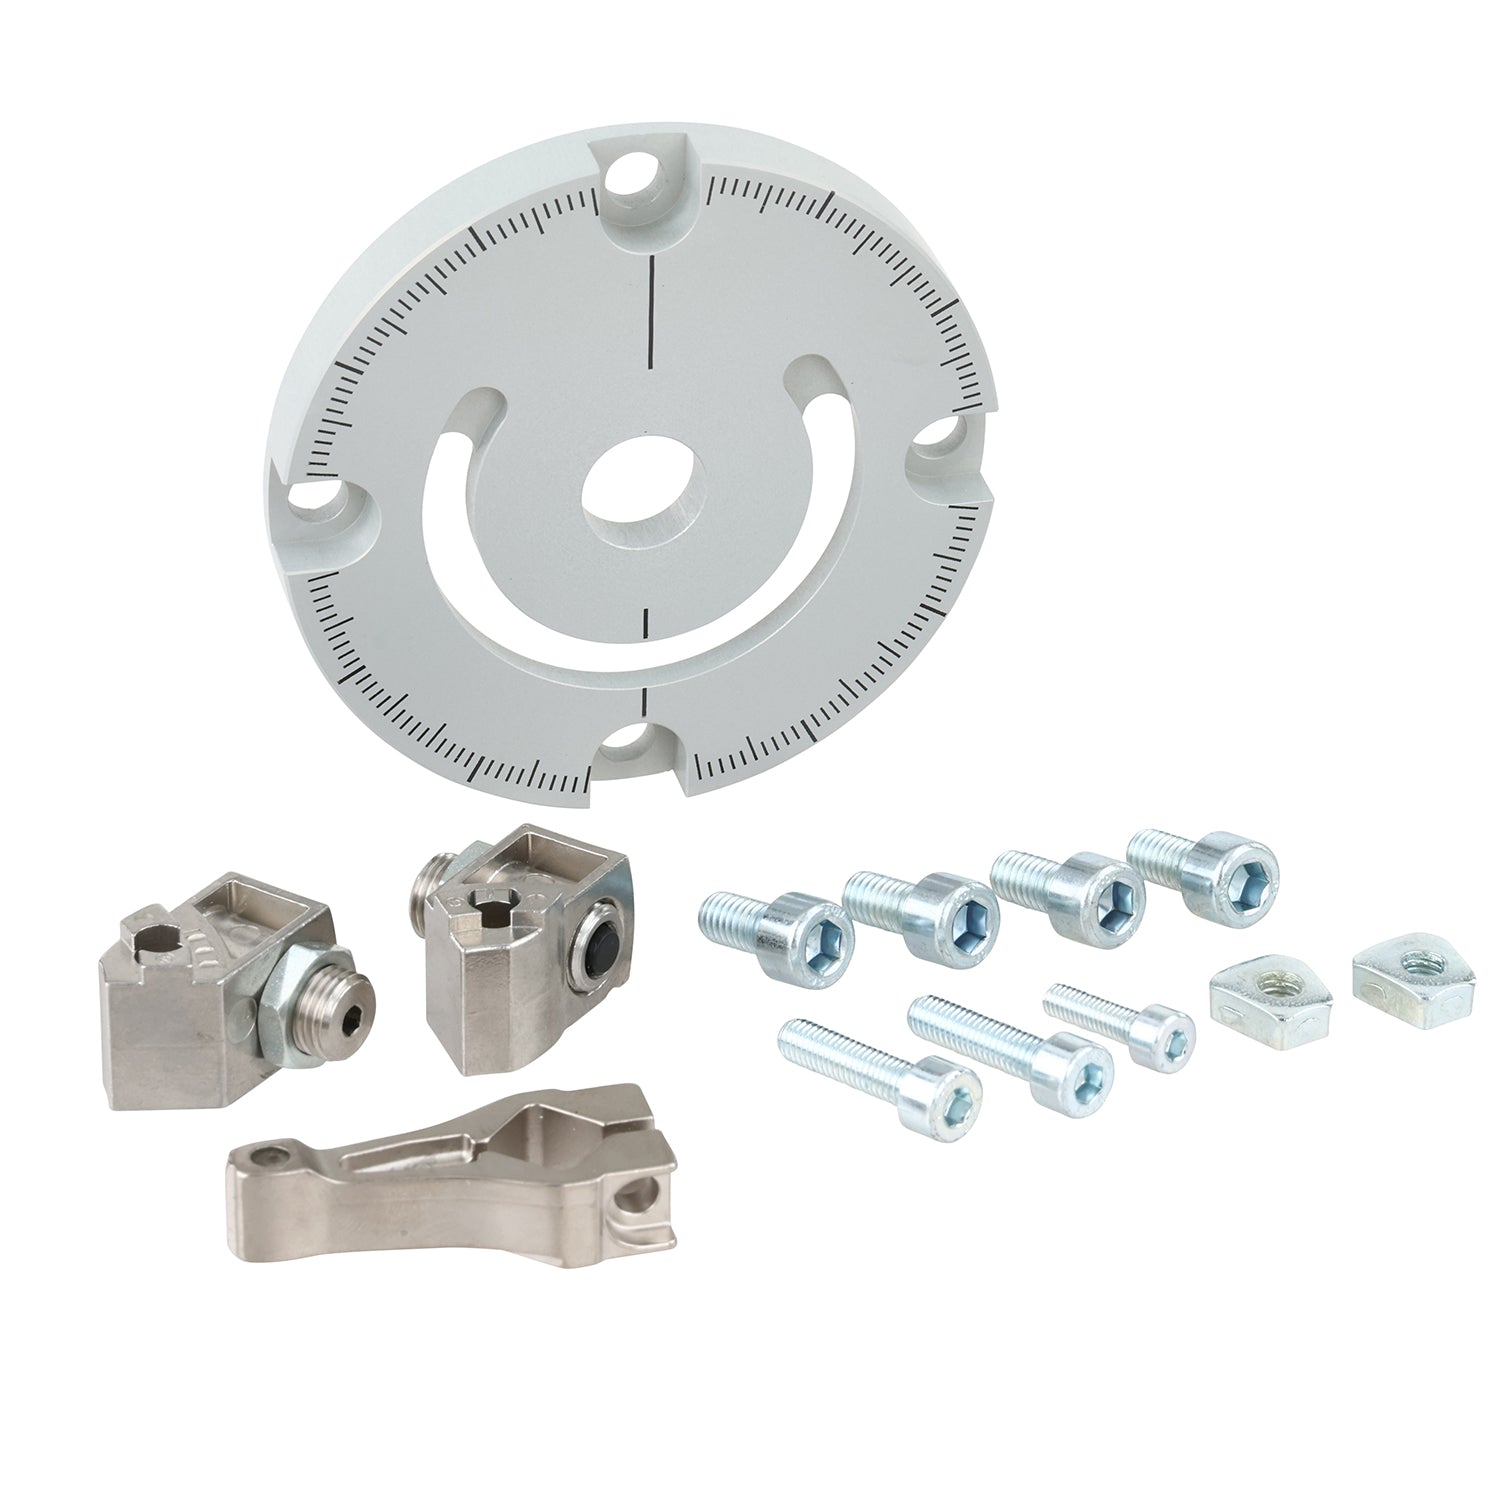 Rotary Cylinder Stop Kit